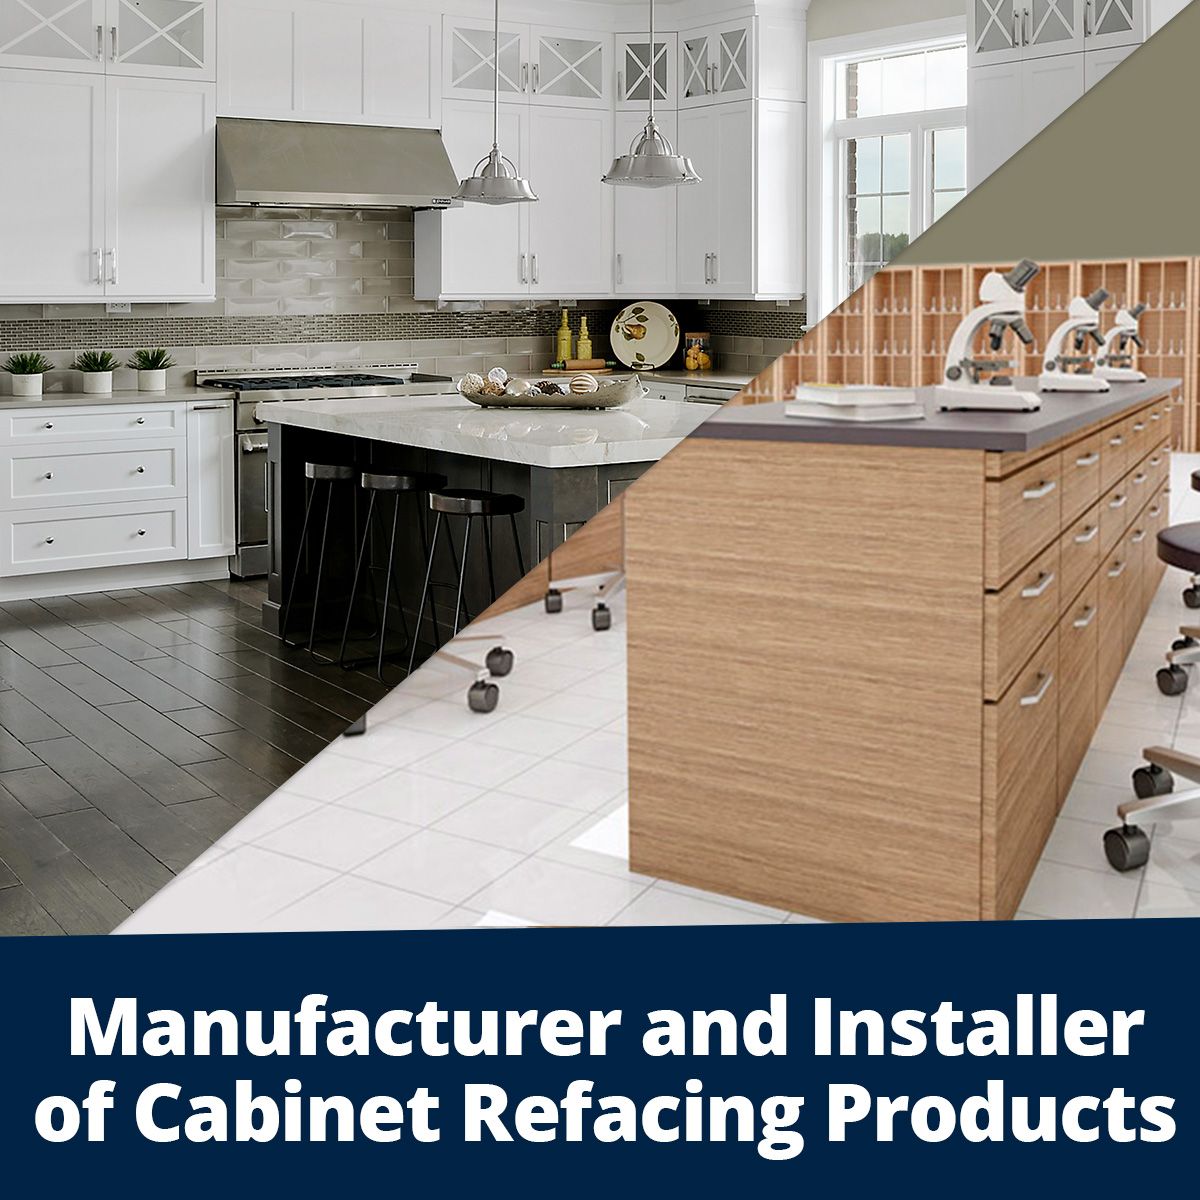 Manufacturer and Installer of Cabinet Refacing Products